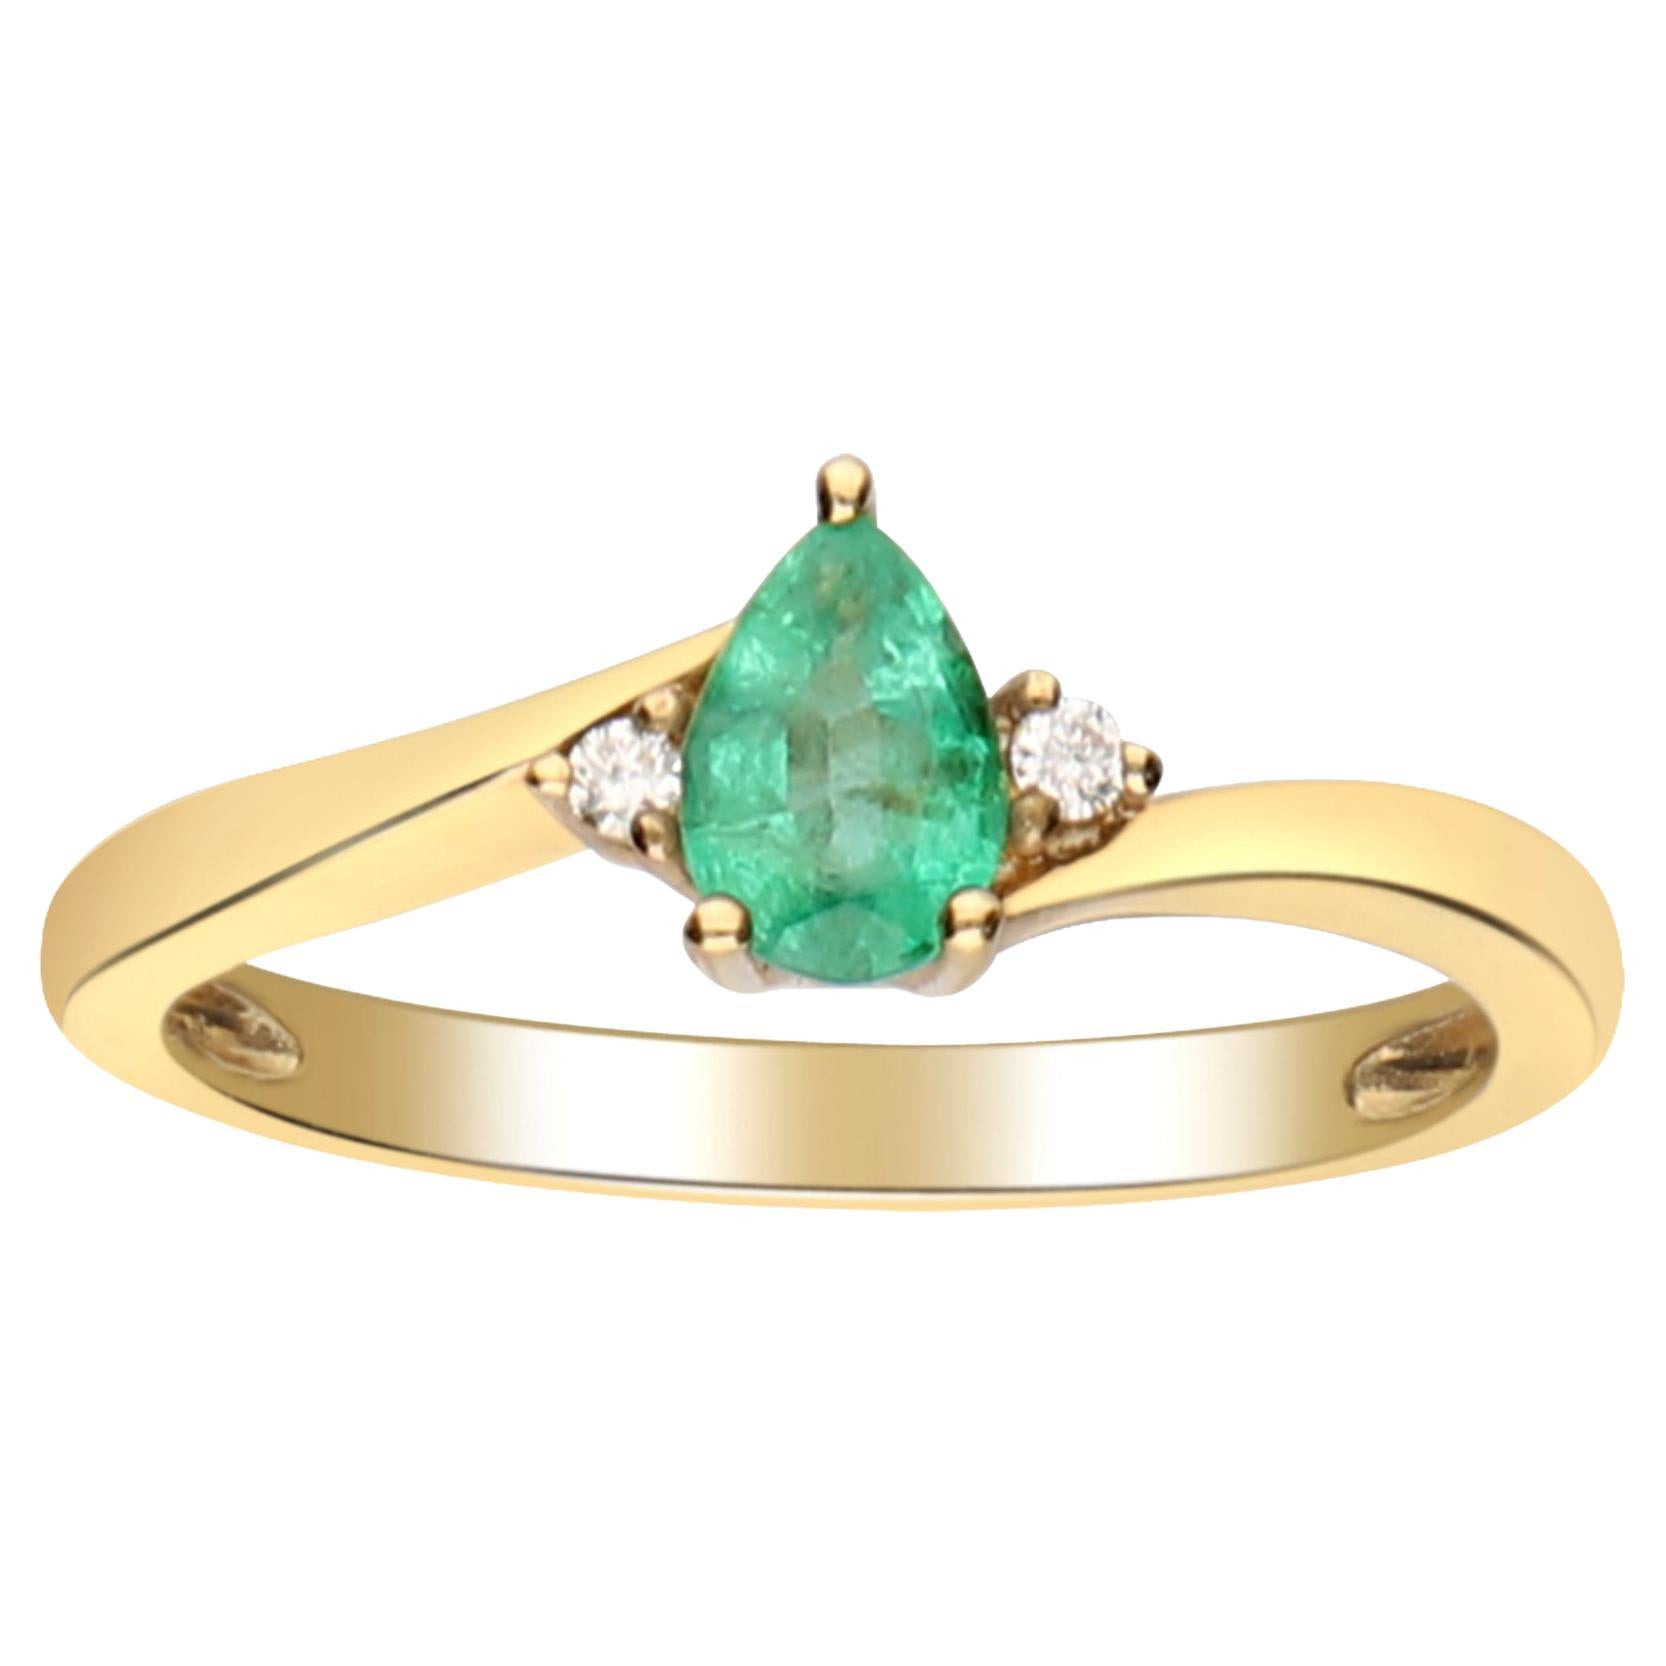 0.35 Carat Pear Cut Emerald Diamond Accents 14K Yellow Gold Engagement Ring